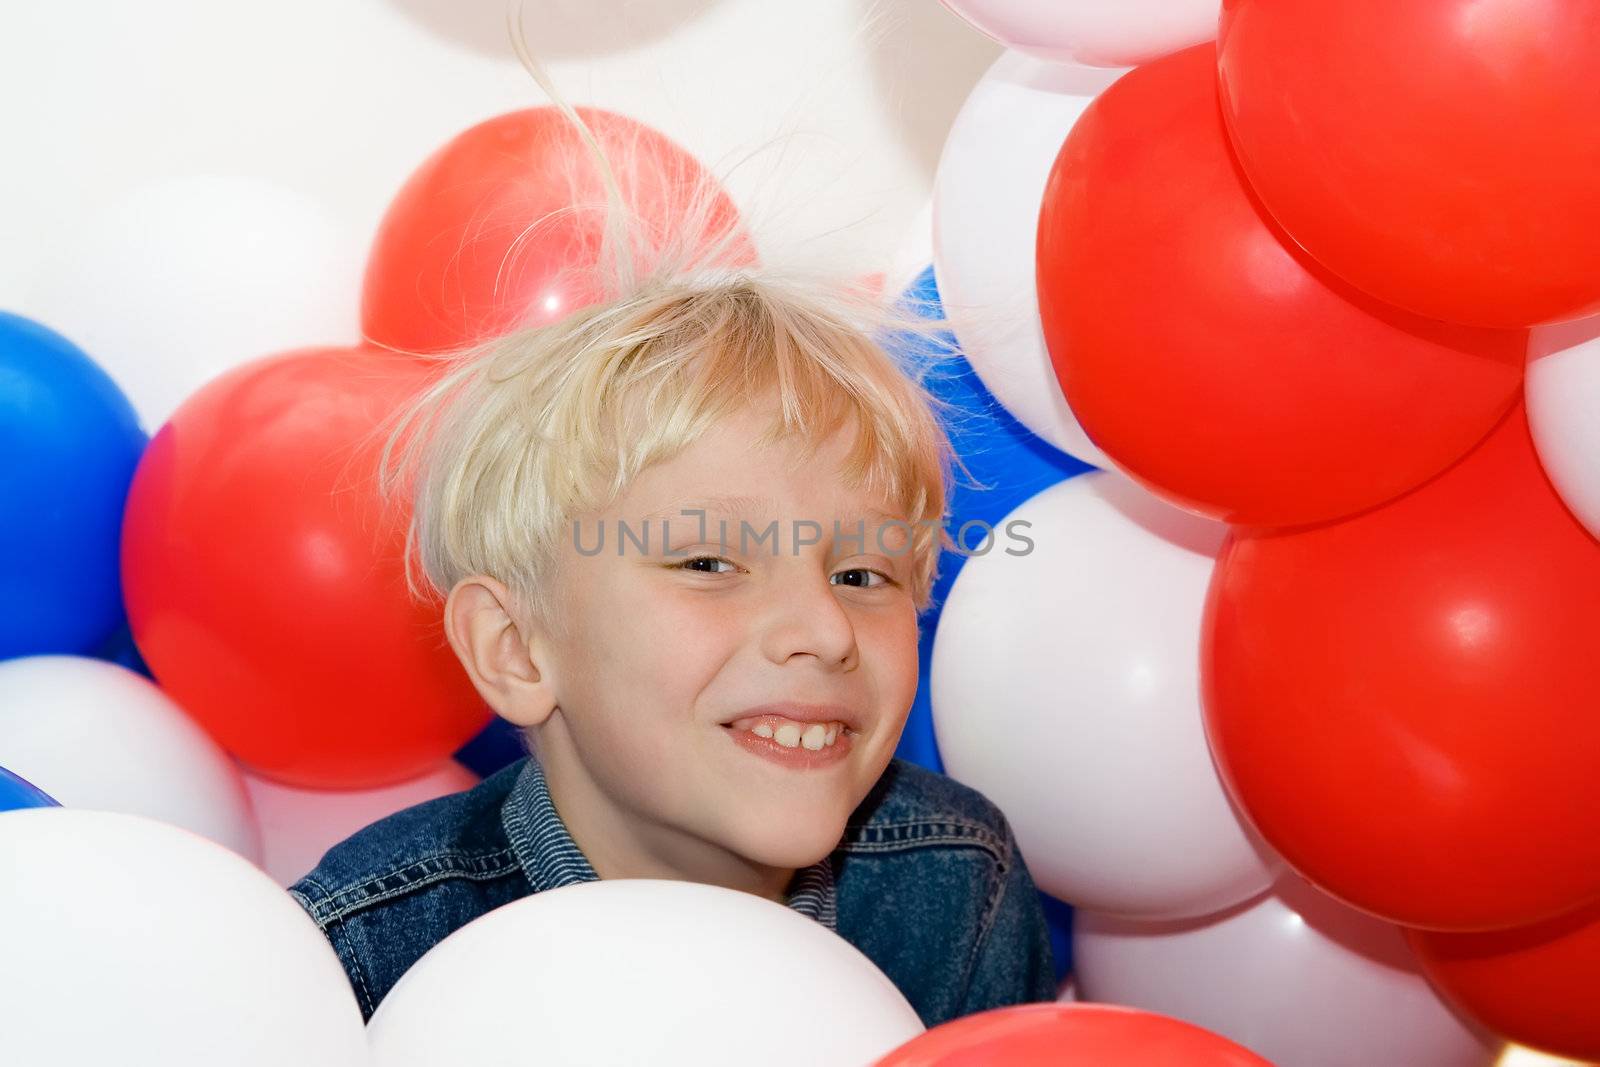 Boy and Balloons 3 by Sergius